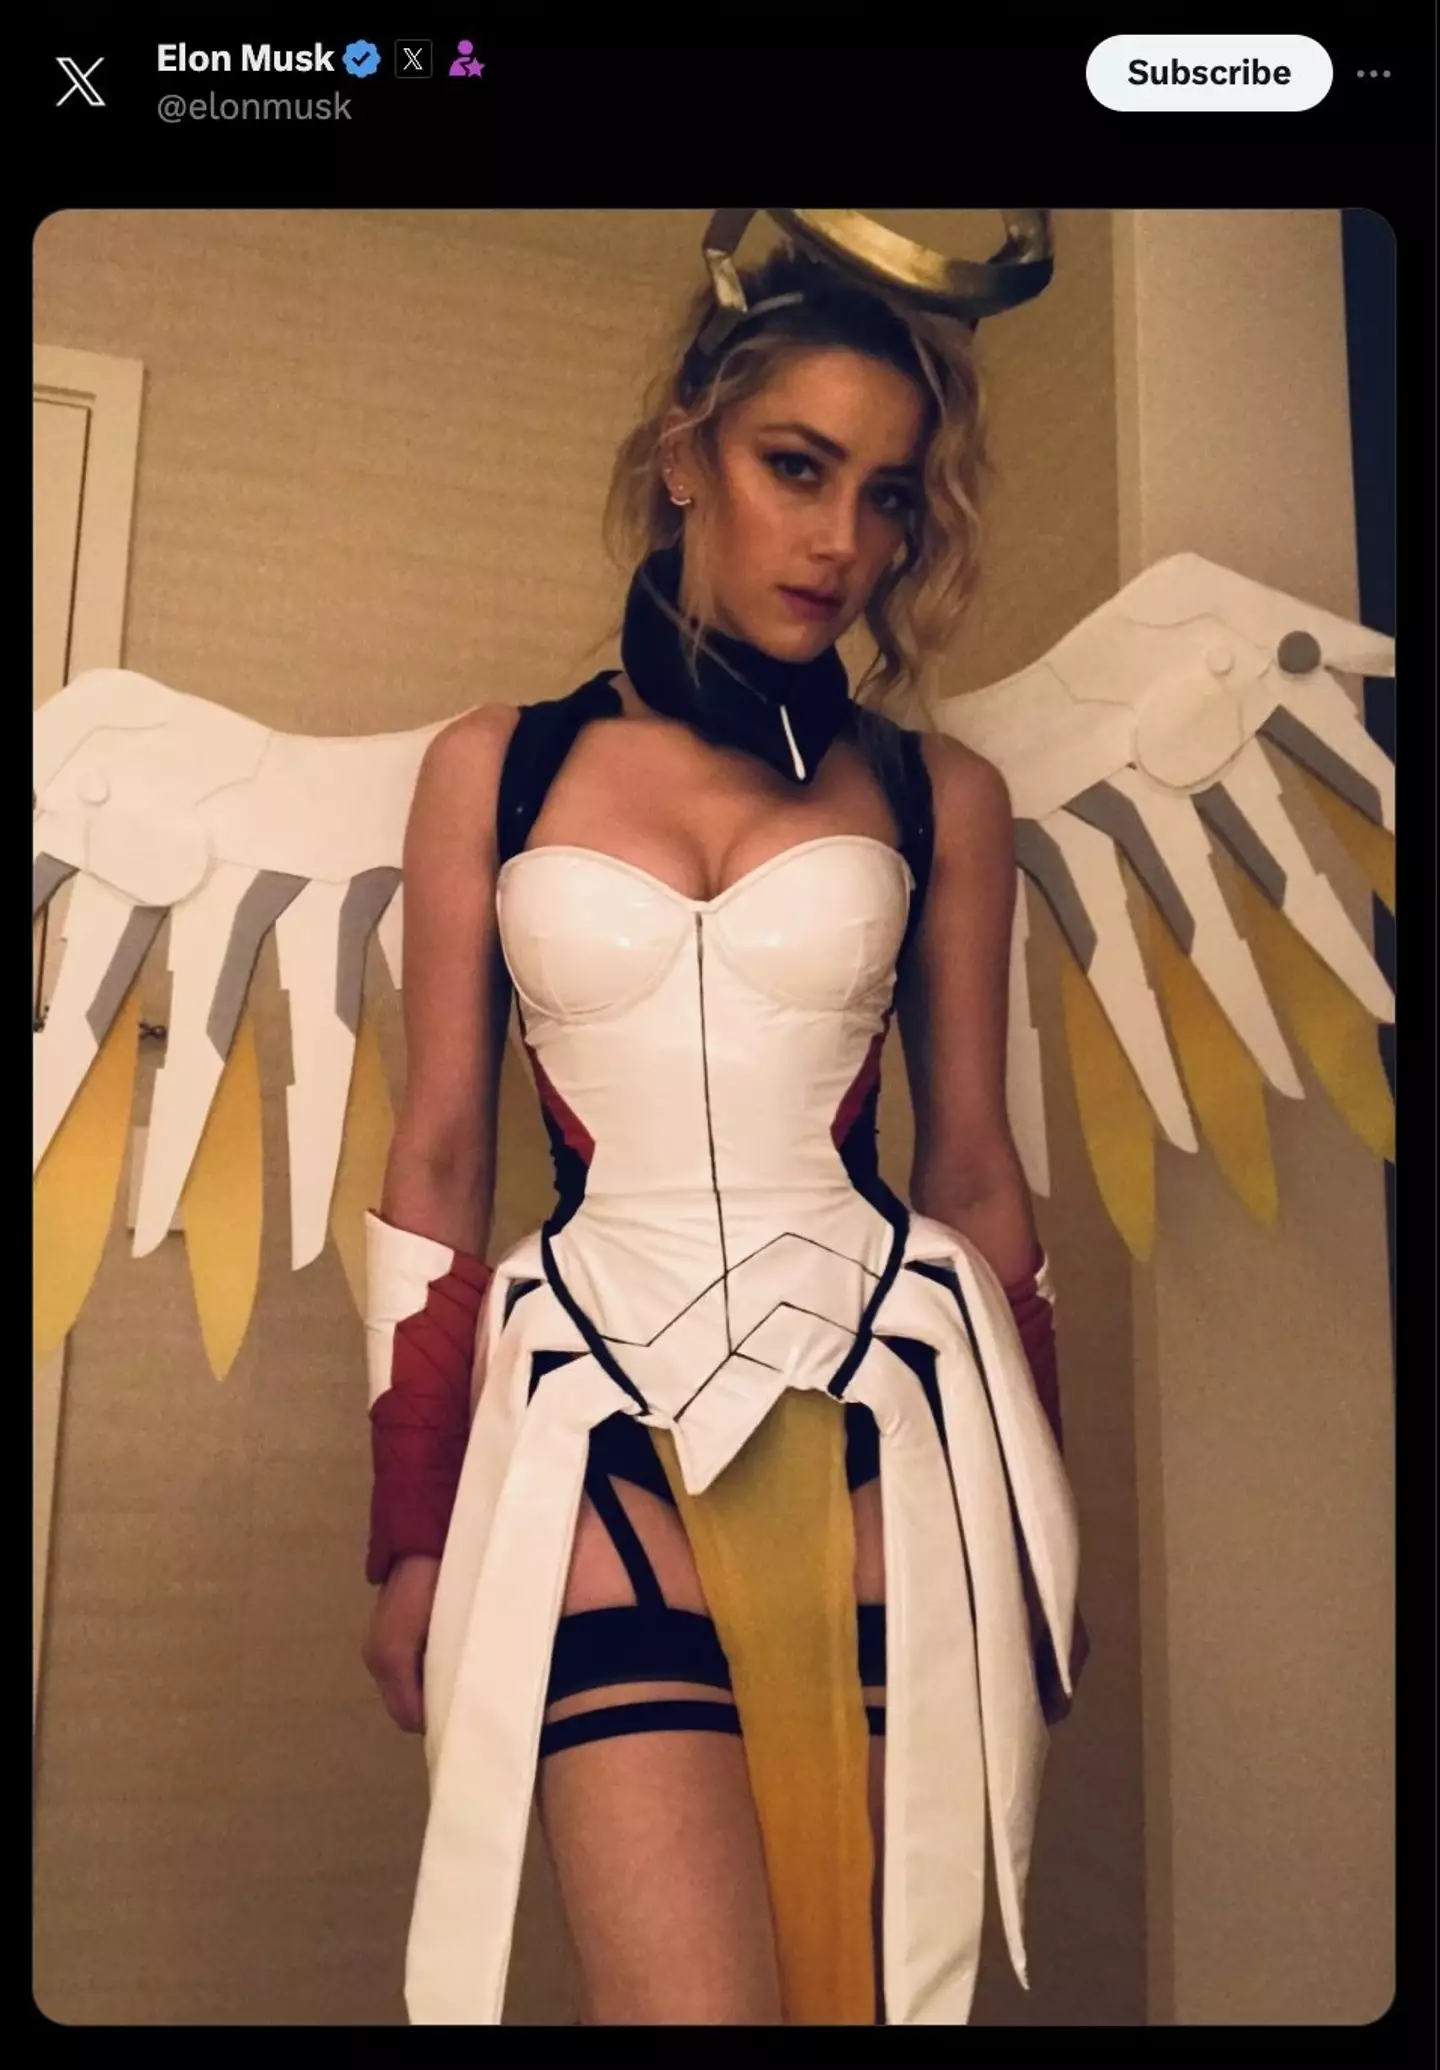 Elon Musk posted a picture of his ex in cosplay to X.